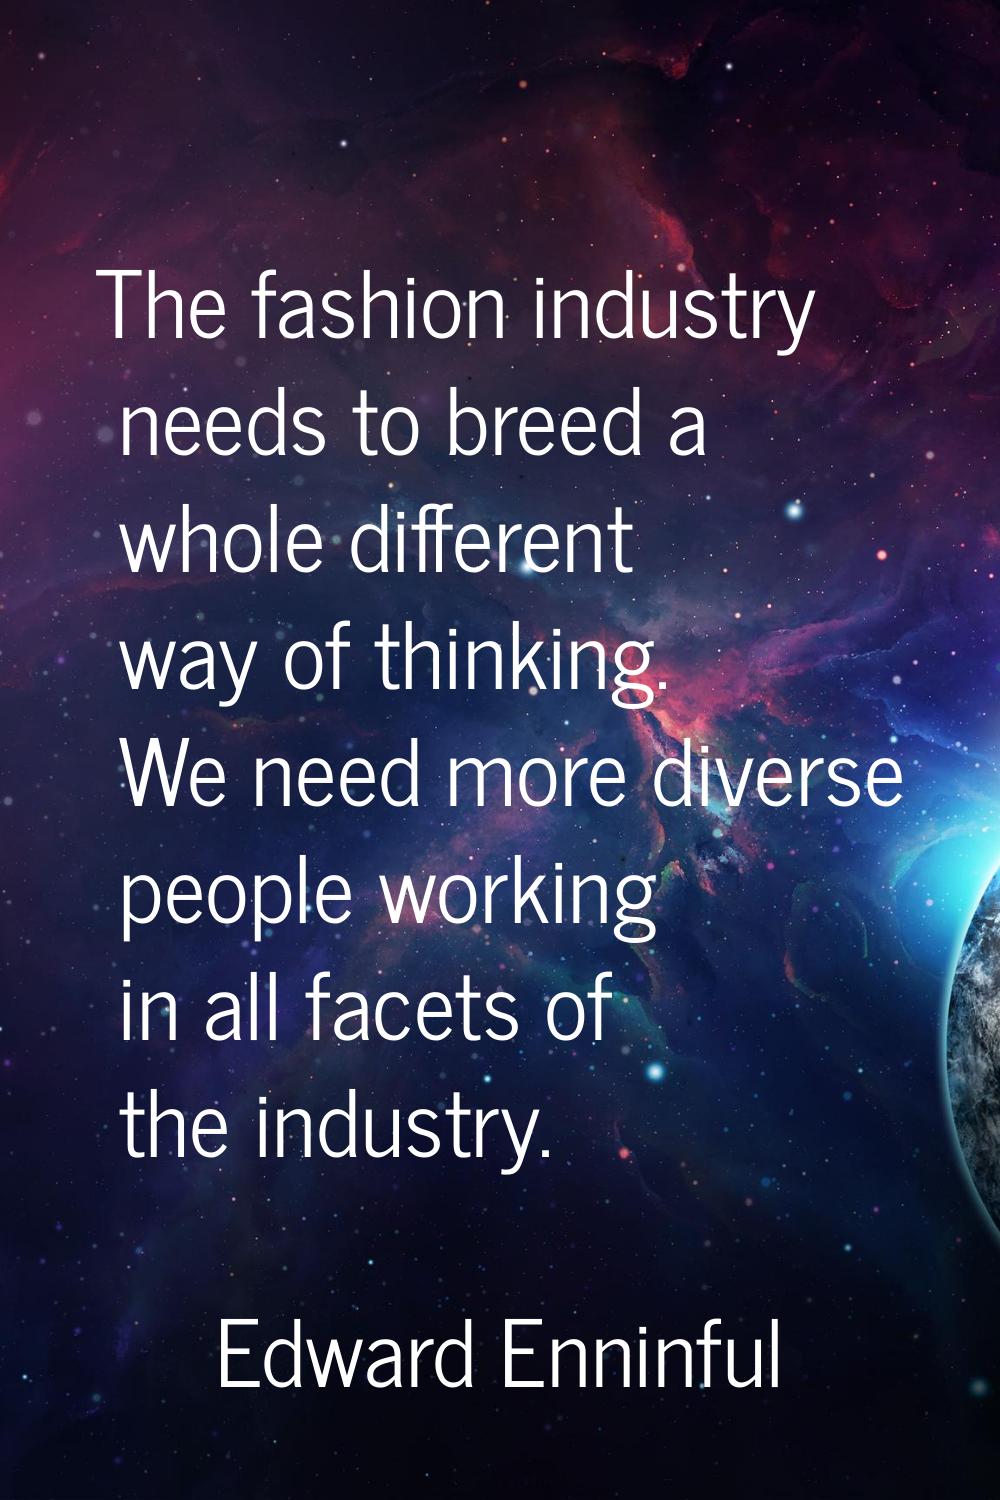 The fashion industry needs to breed a whole different way of thinking. We need more diverse people 